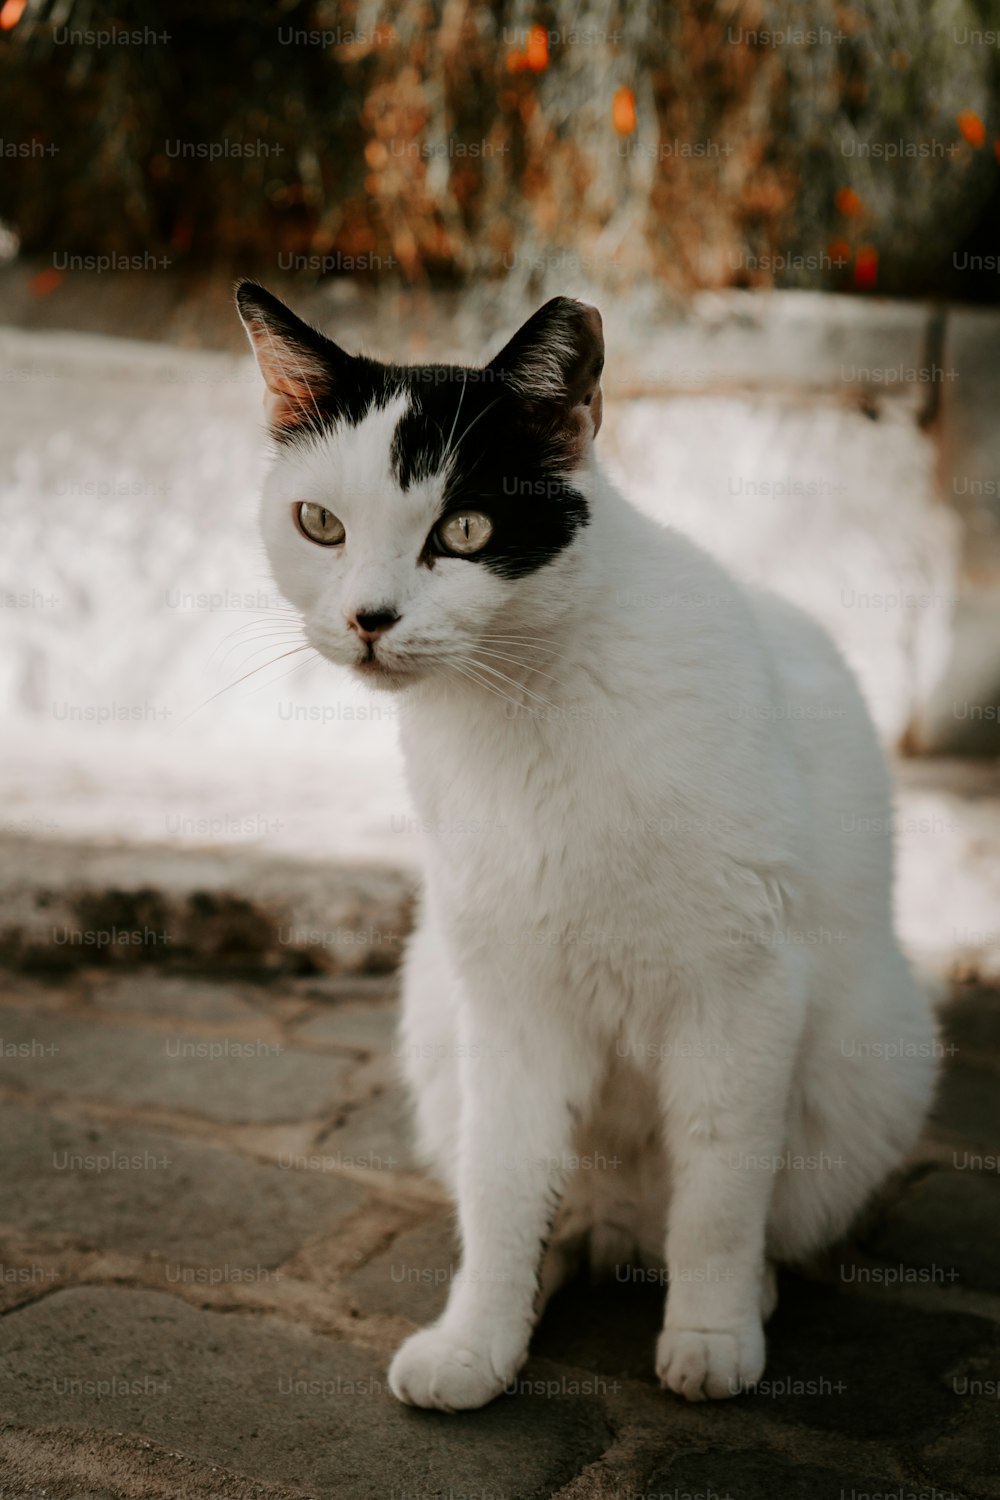 a black and white cat sitting on a stone floor